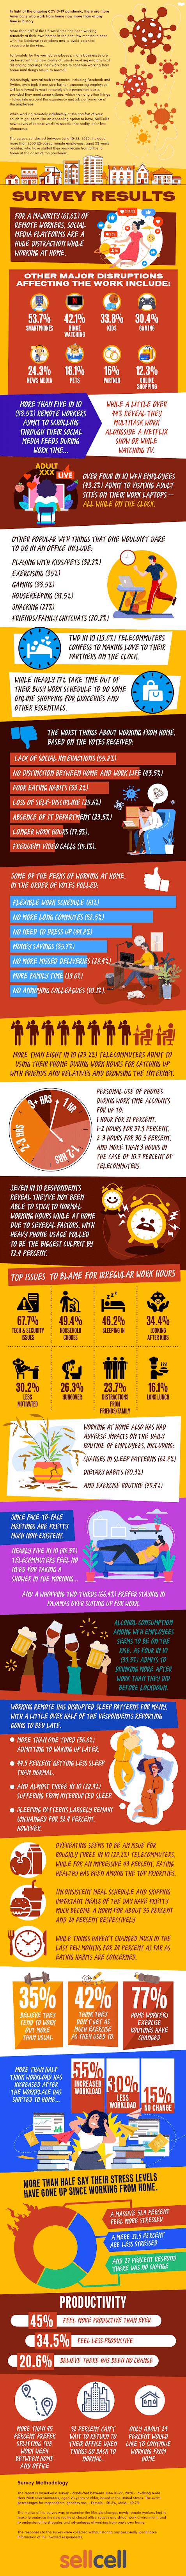 Employees That Work from Home Are Unproductive - Infographic